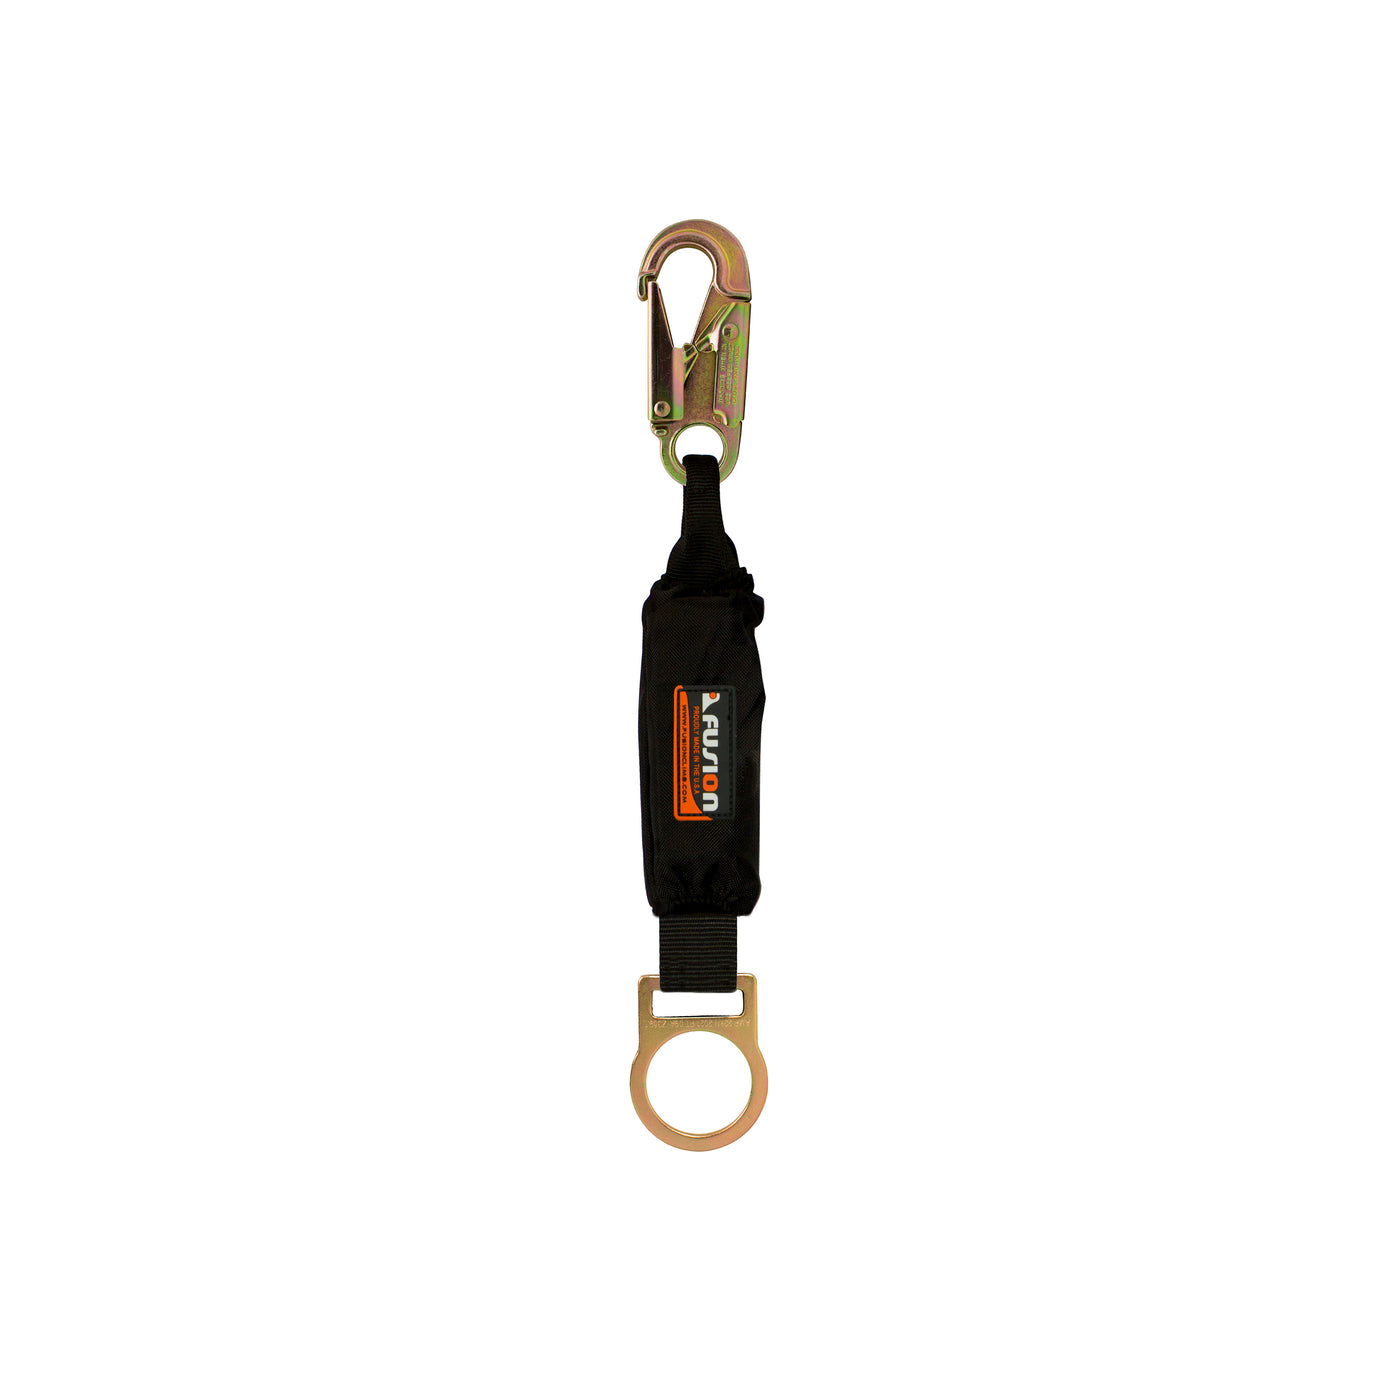 Steel Snap Hook and D-Ring Safety Lanyard - Black